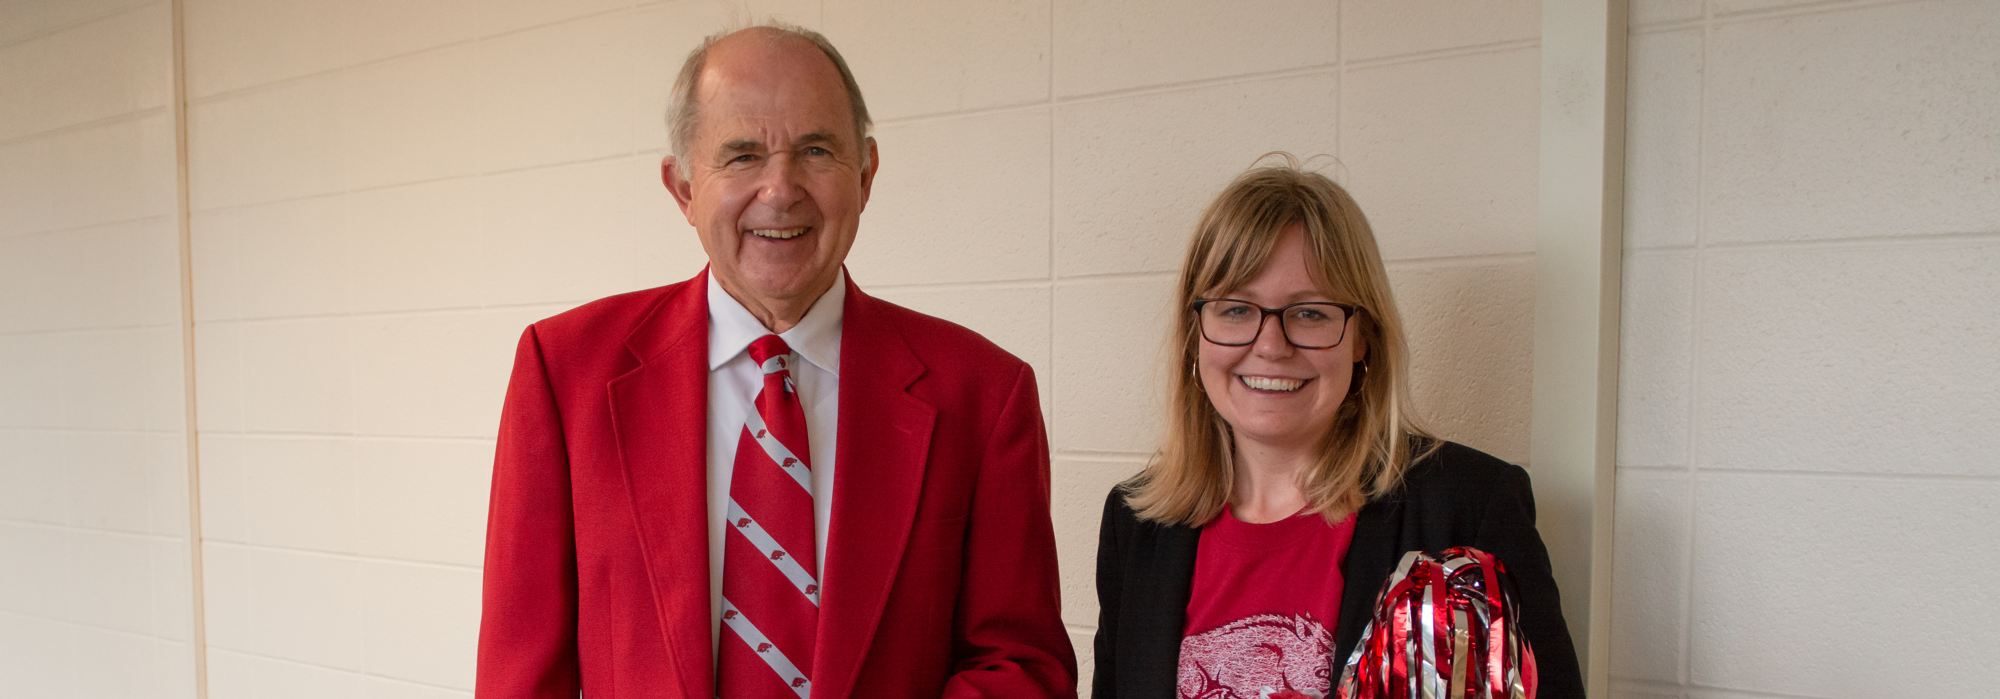 Profs. Brill and Bullock dressed in Razorback best for Spirit Week 2021